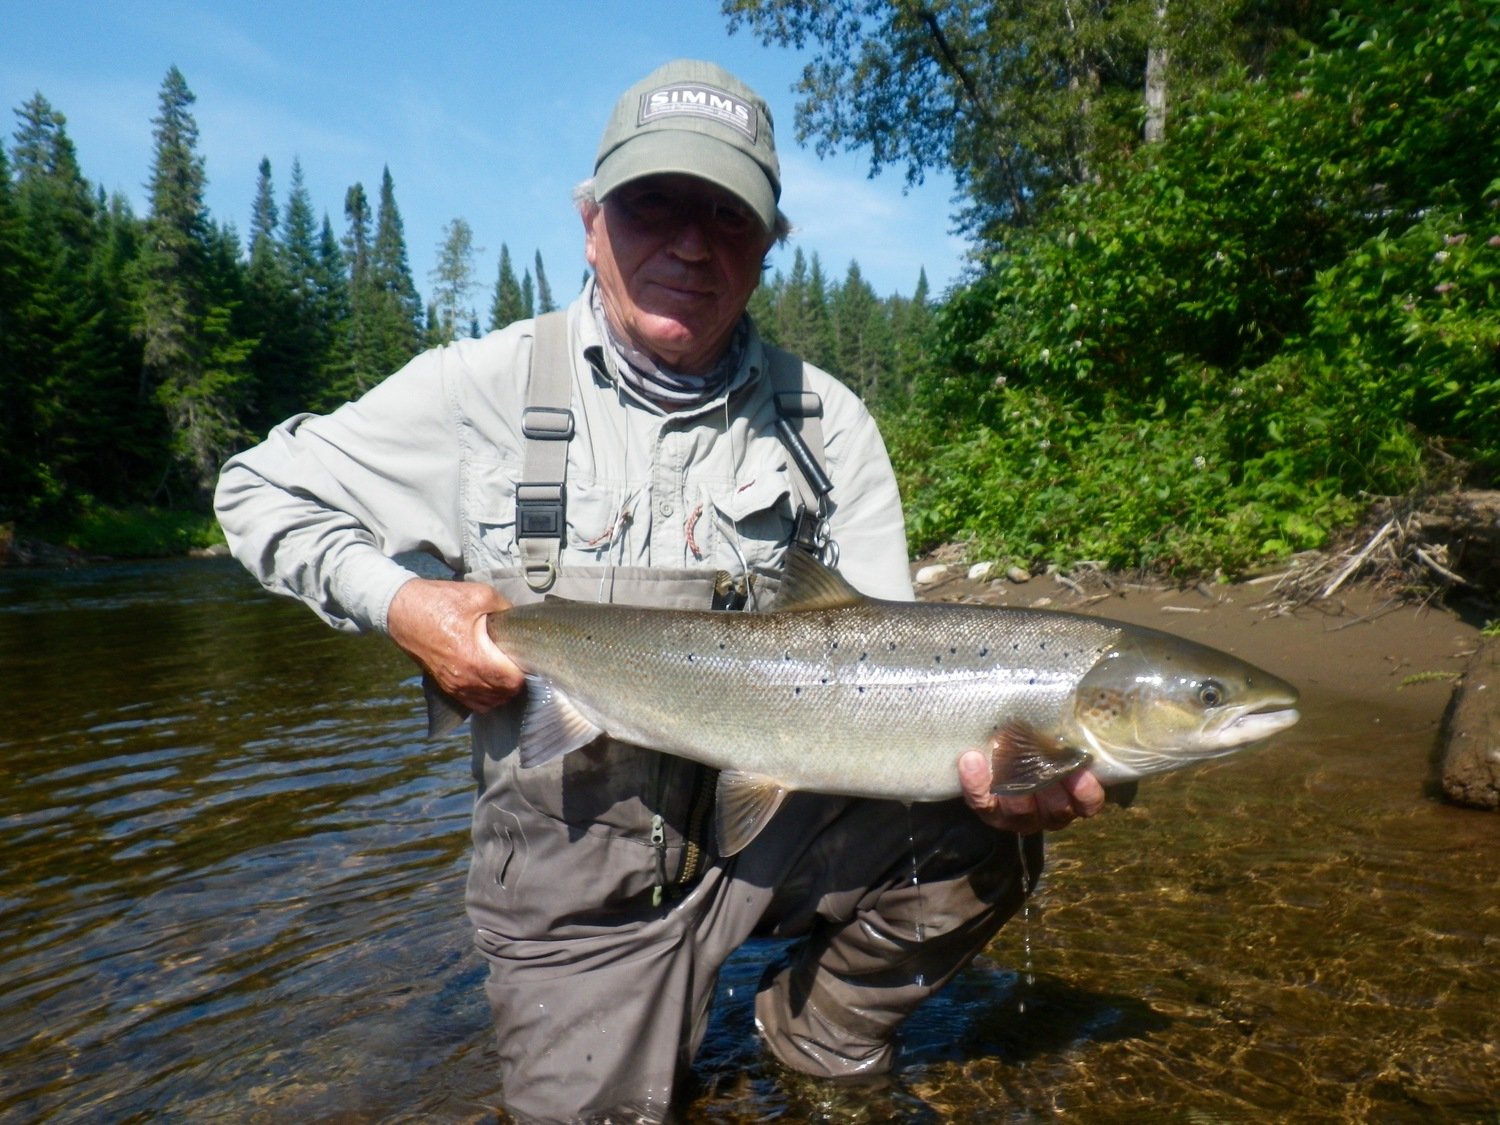 What a nicely marked Atlantic Salmon and great picture with water dripping down.